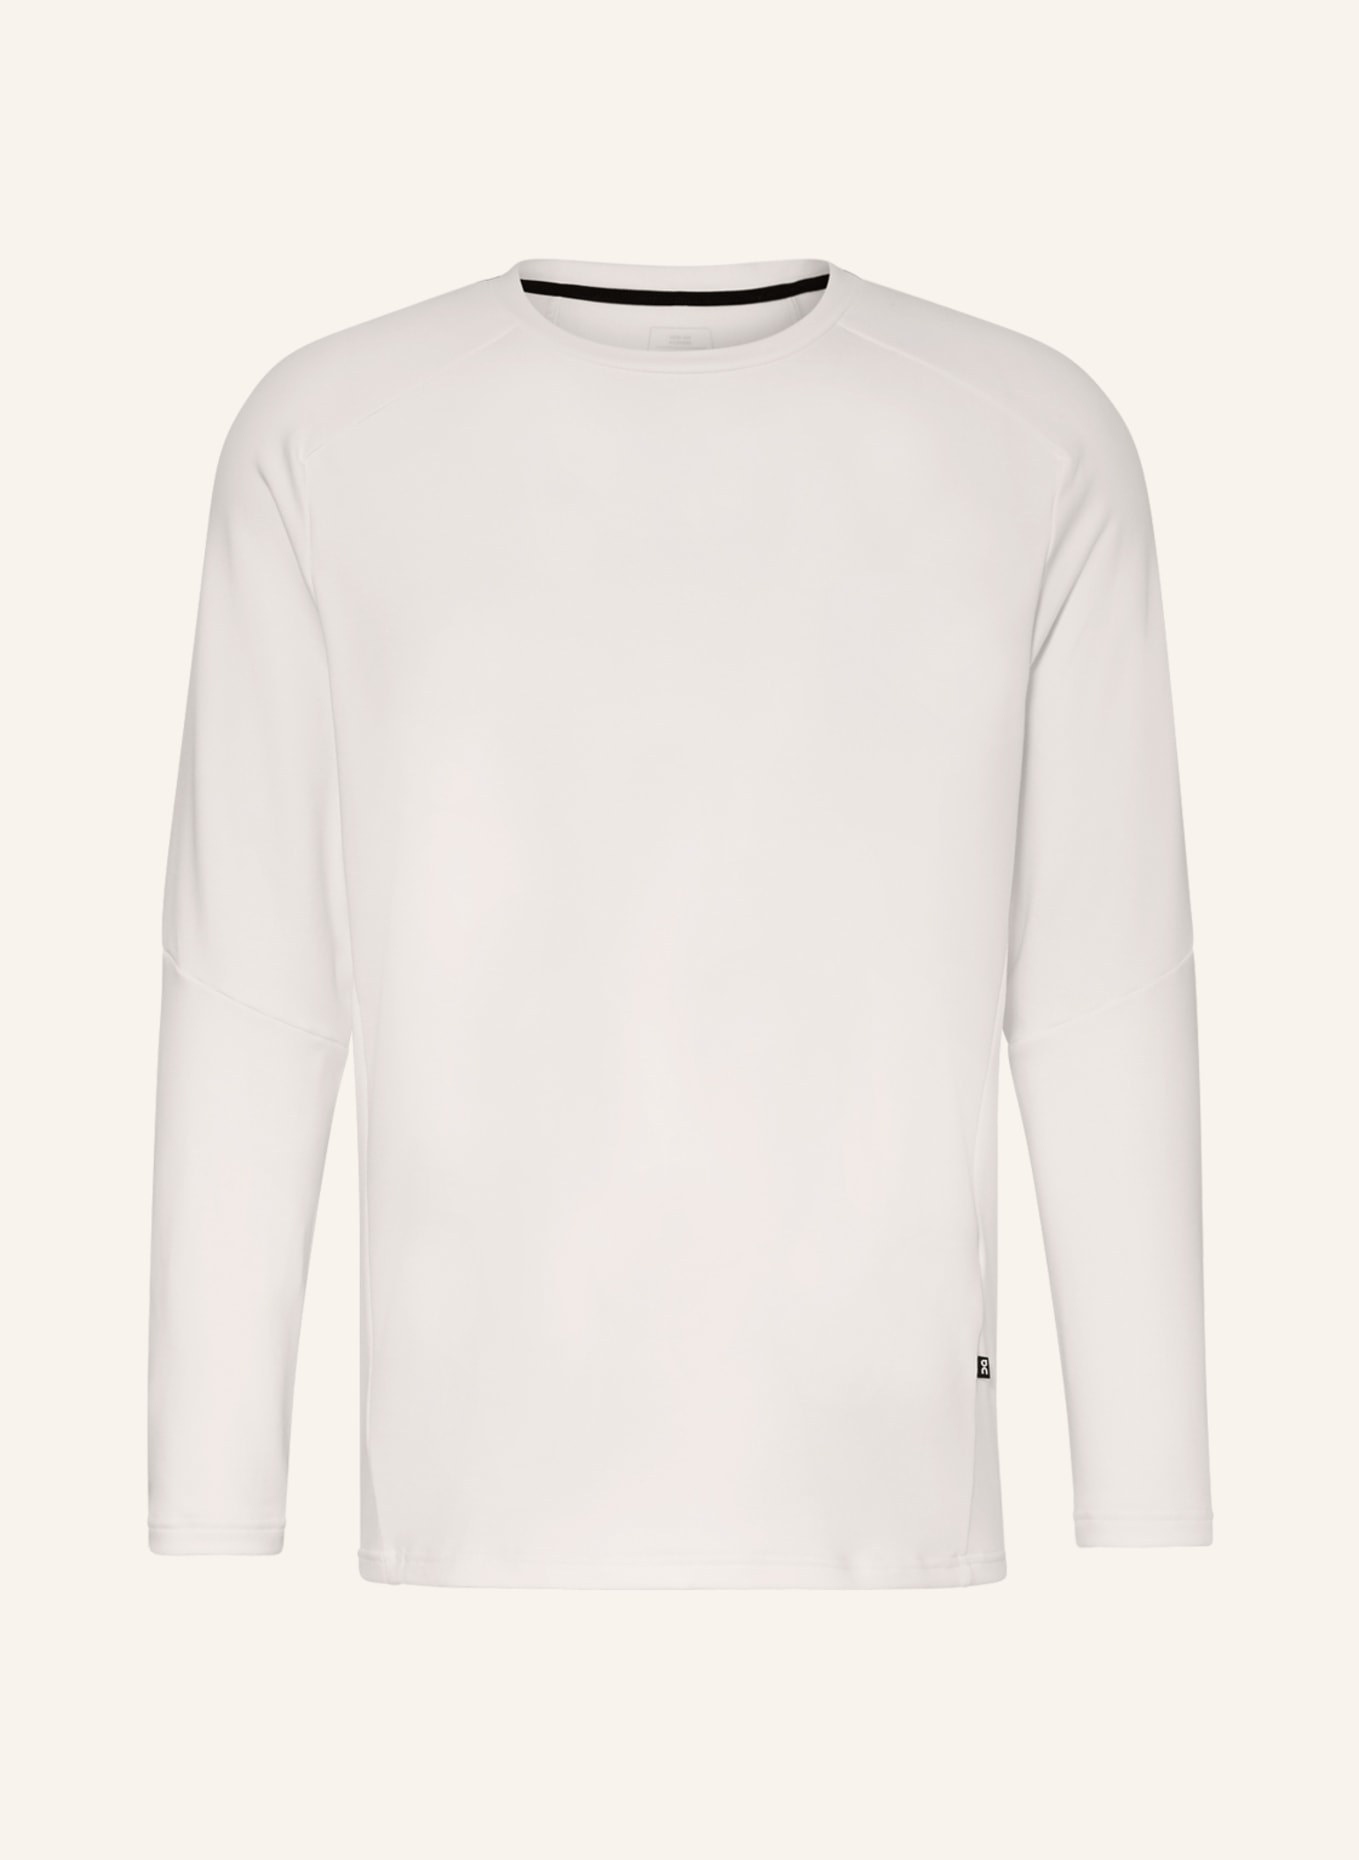 On Long sleeve shirt FOCUS, Color: WHITE (Image 1)